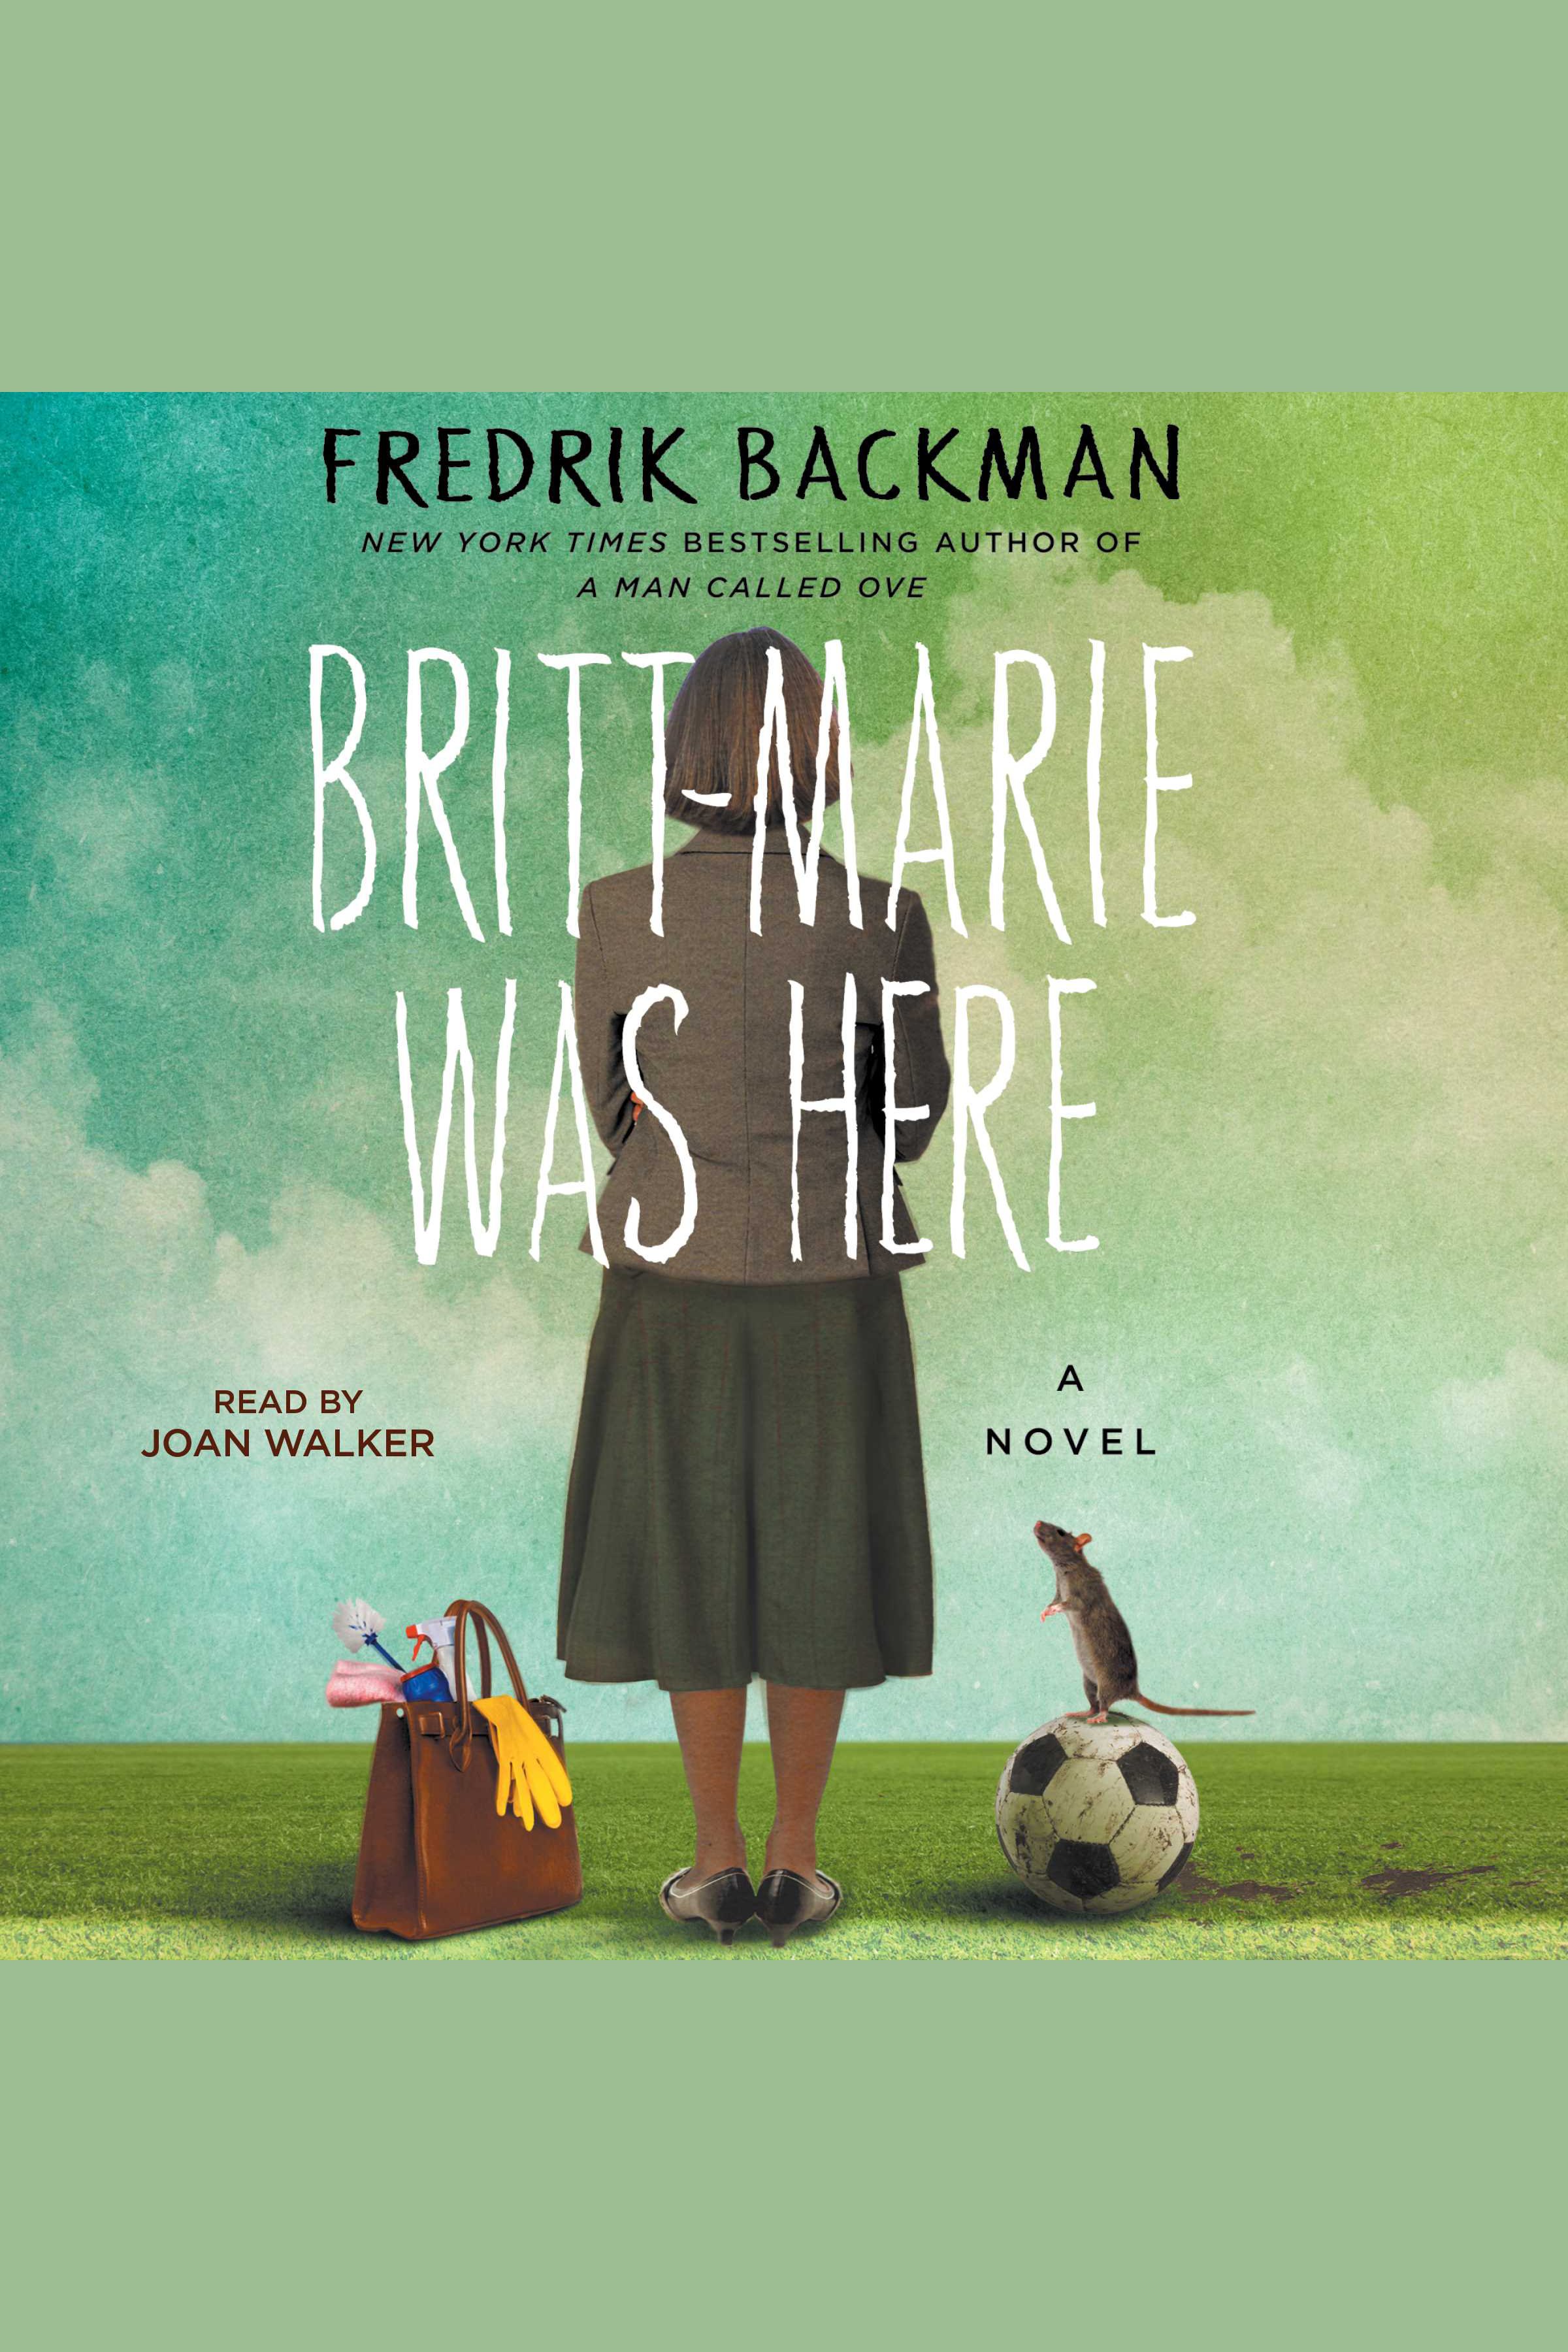 Britt-Marie was here cover image